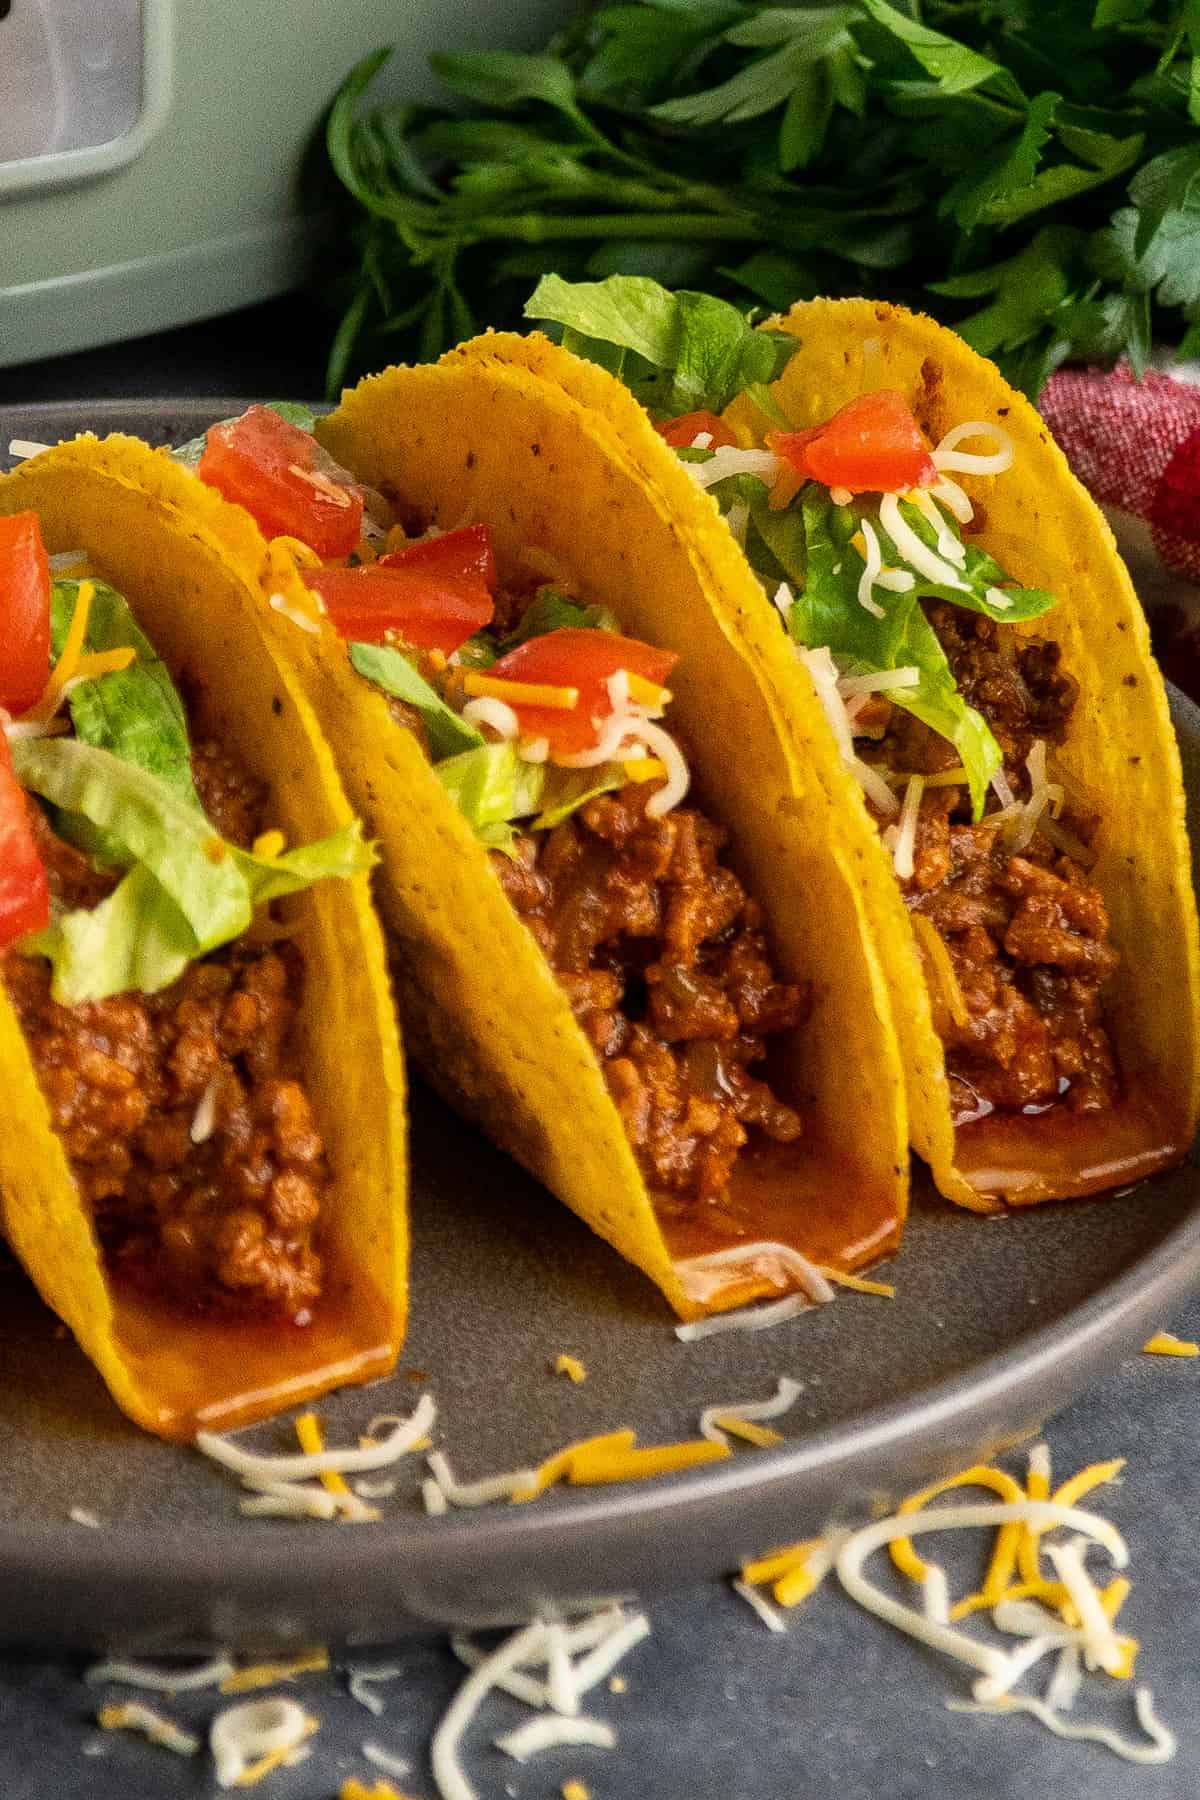 Three ground beef tacos in hard shells on a plate.